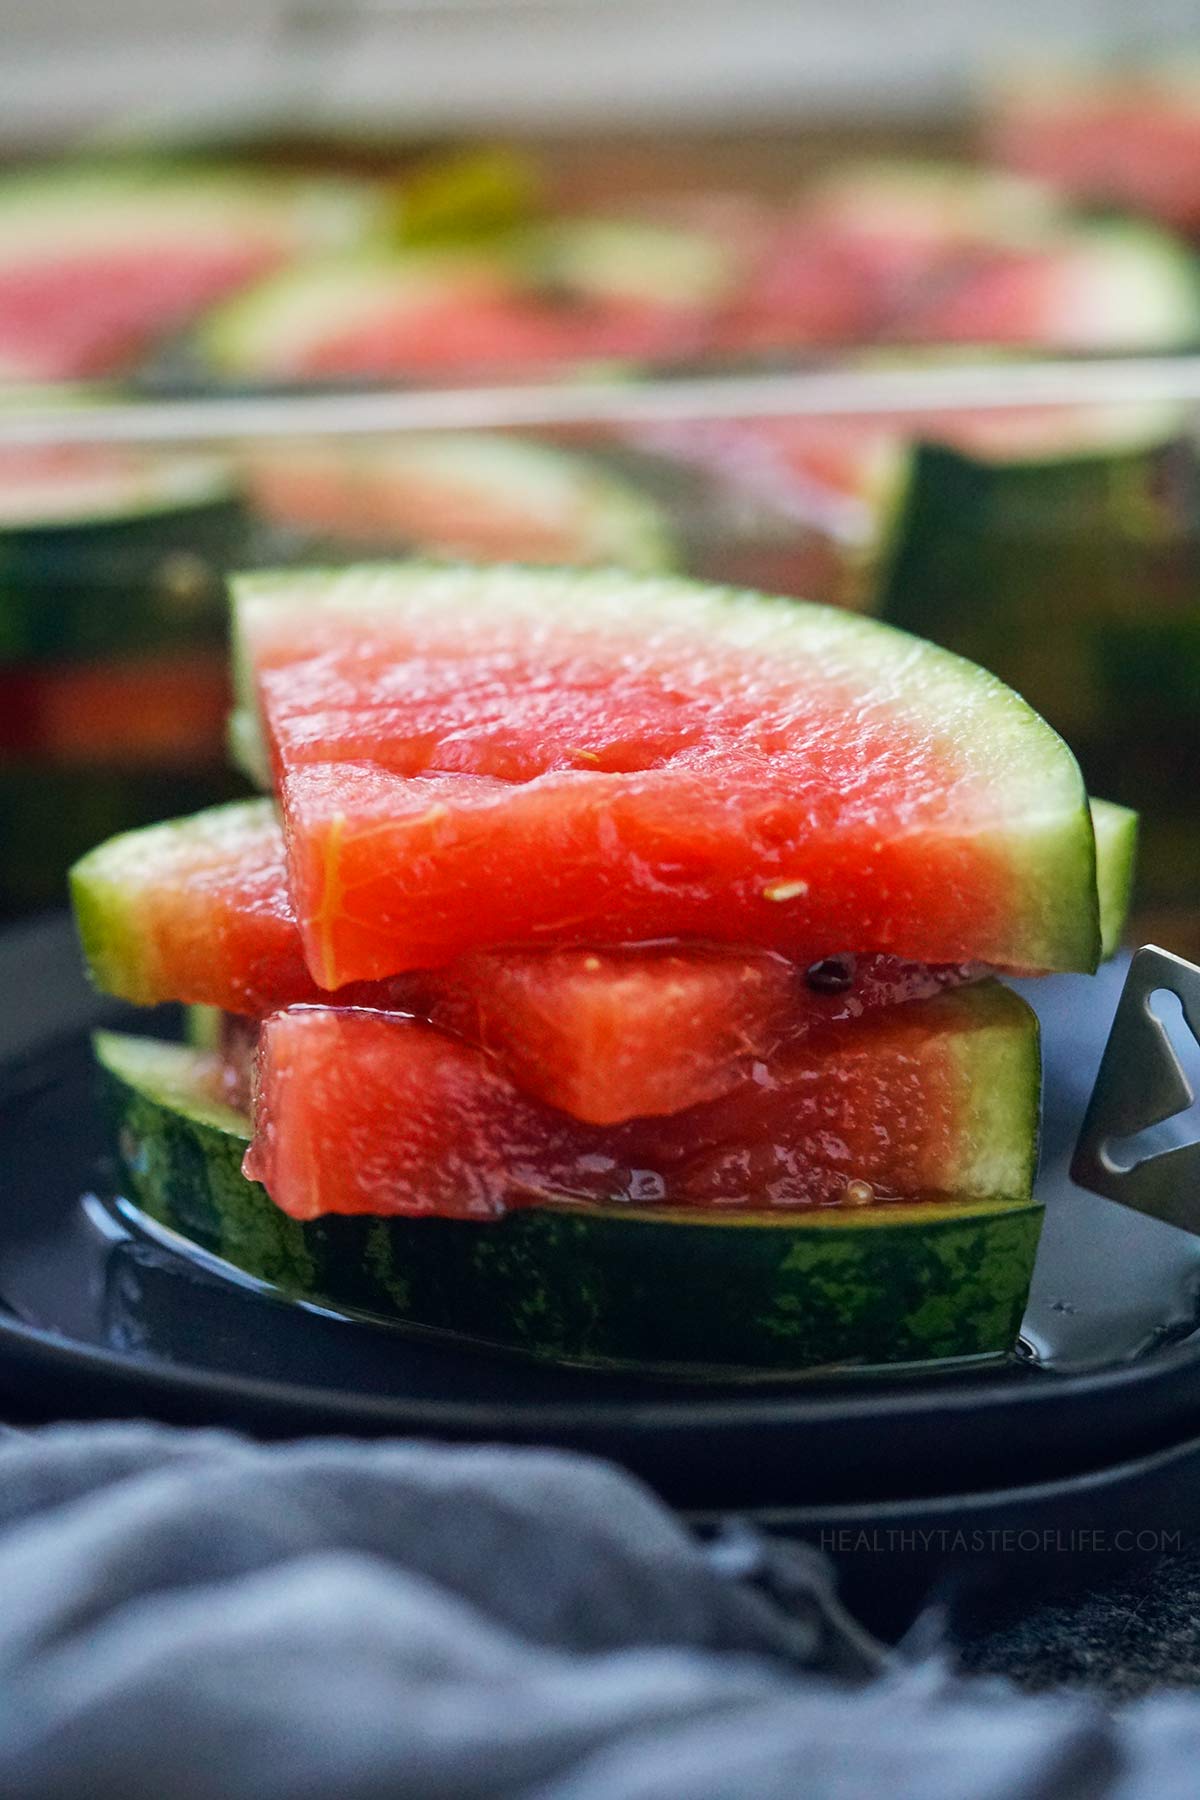 Ready fermented watermelon slices stacked on a plate.